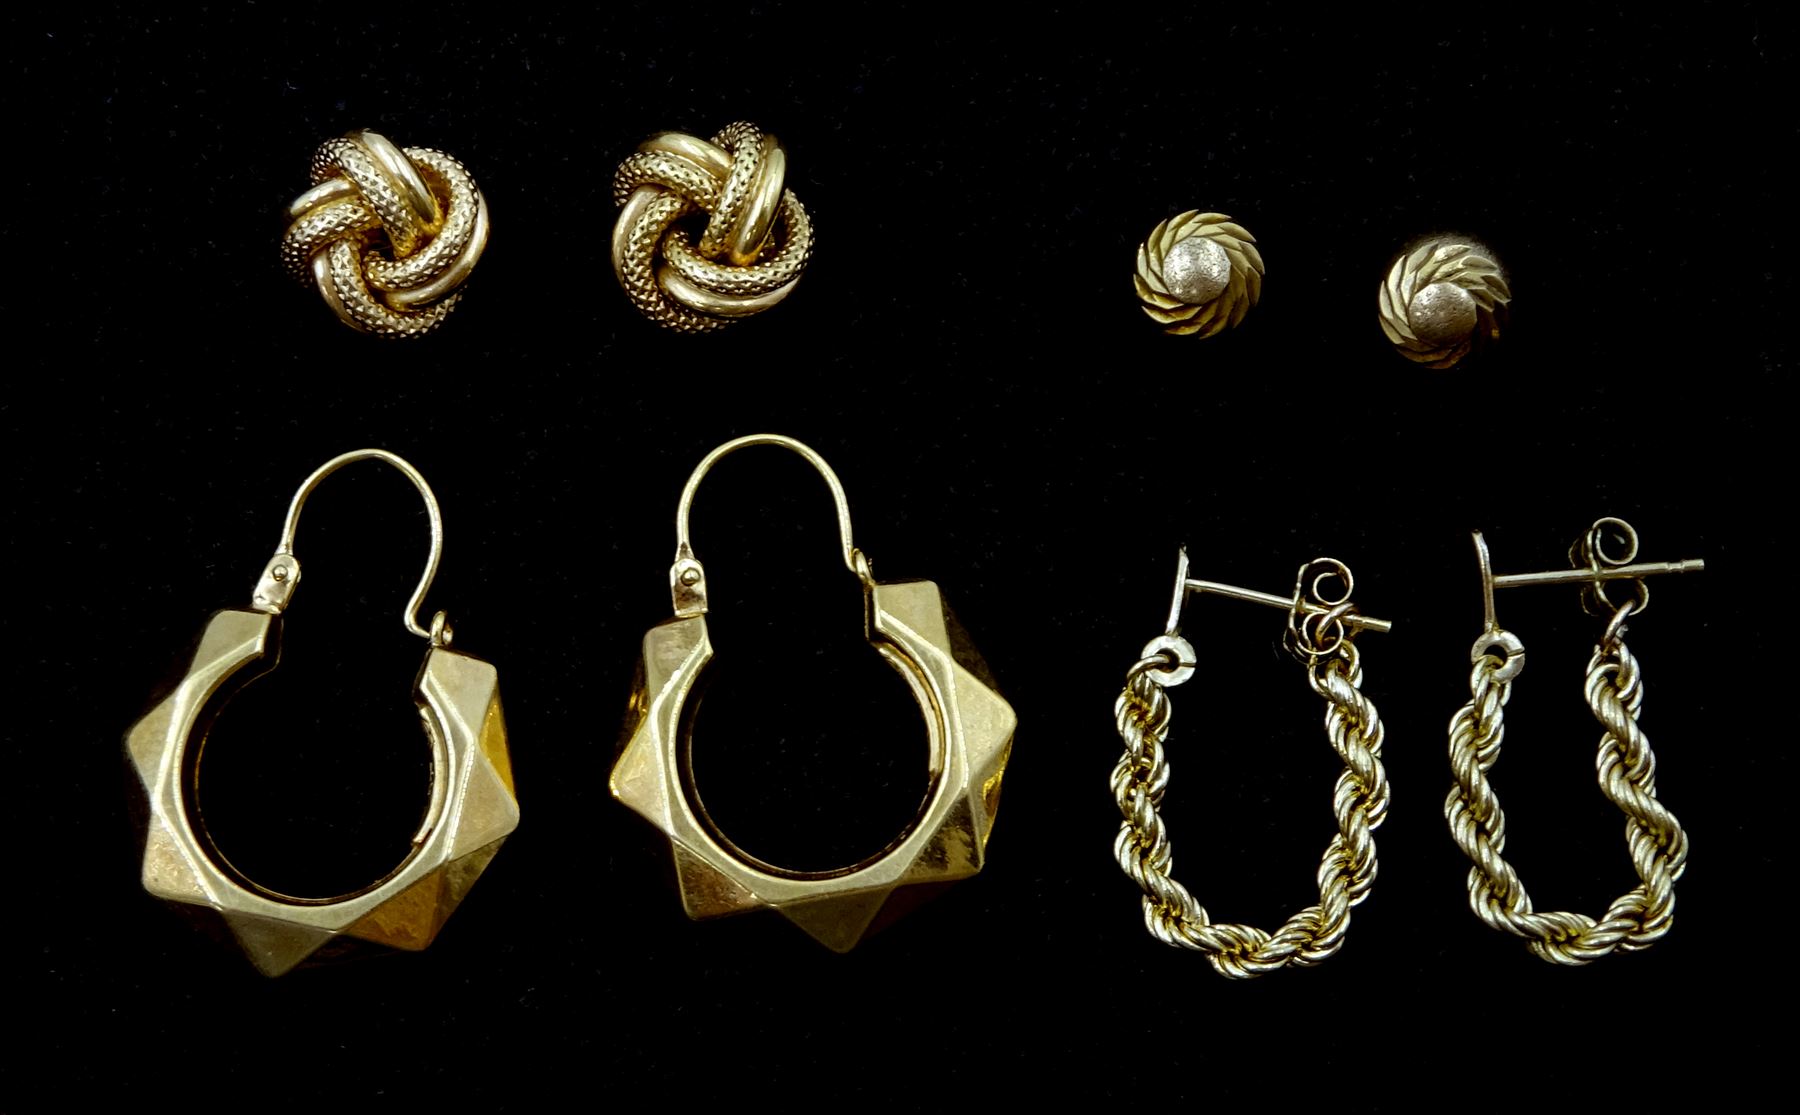 Four pairs of 9ct gold earrings including knot studs and geometric hoops